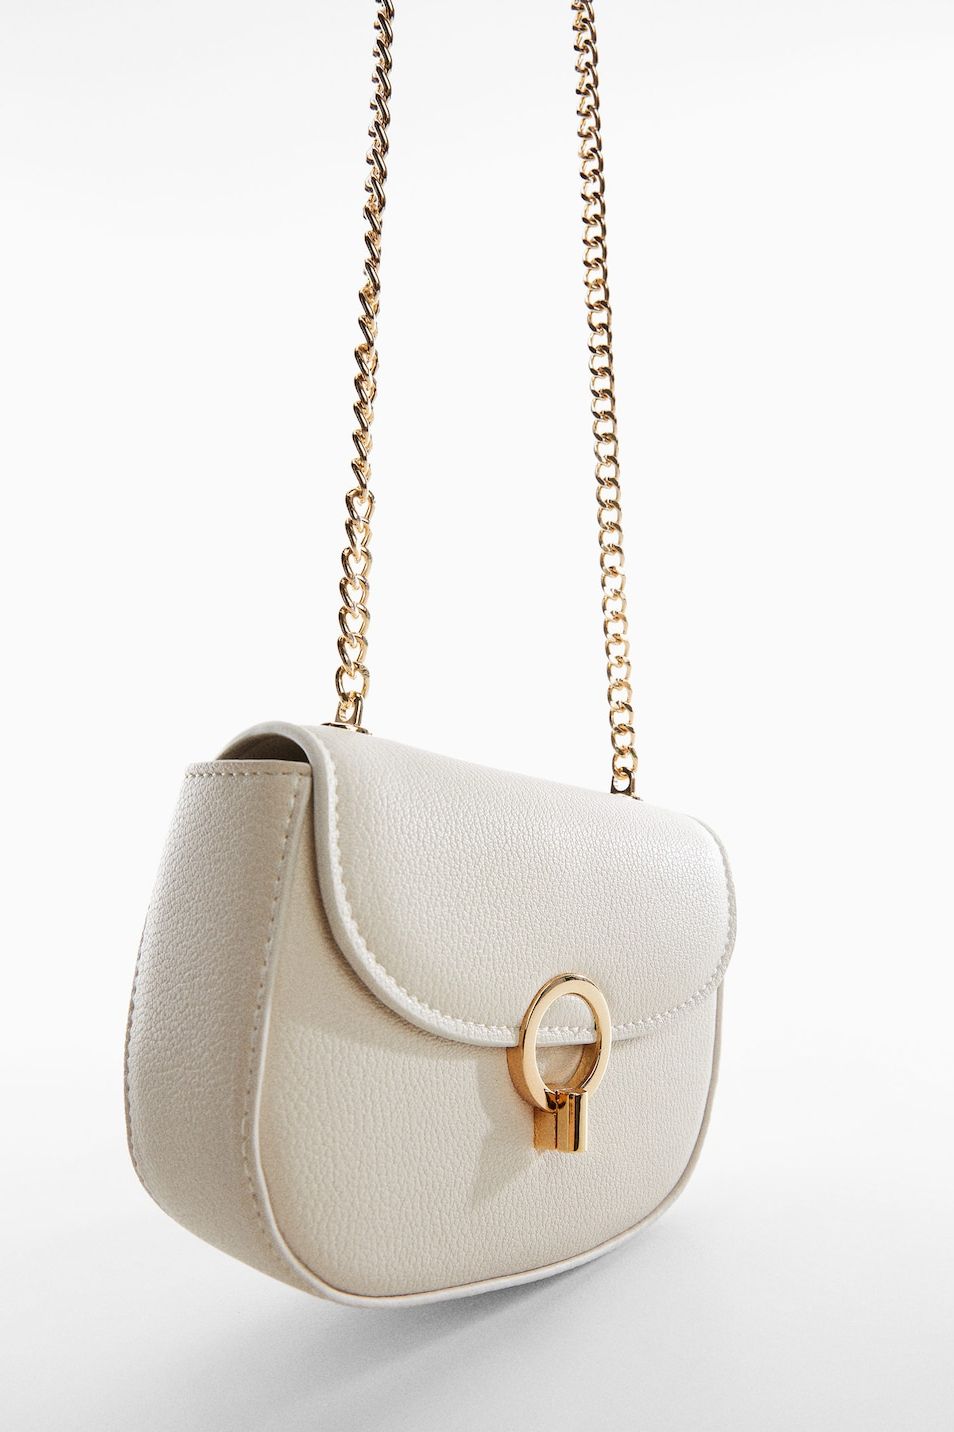 A Christian Dior Saddle Bag Dupe for Less Than $40? Giddy-Up